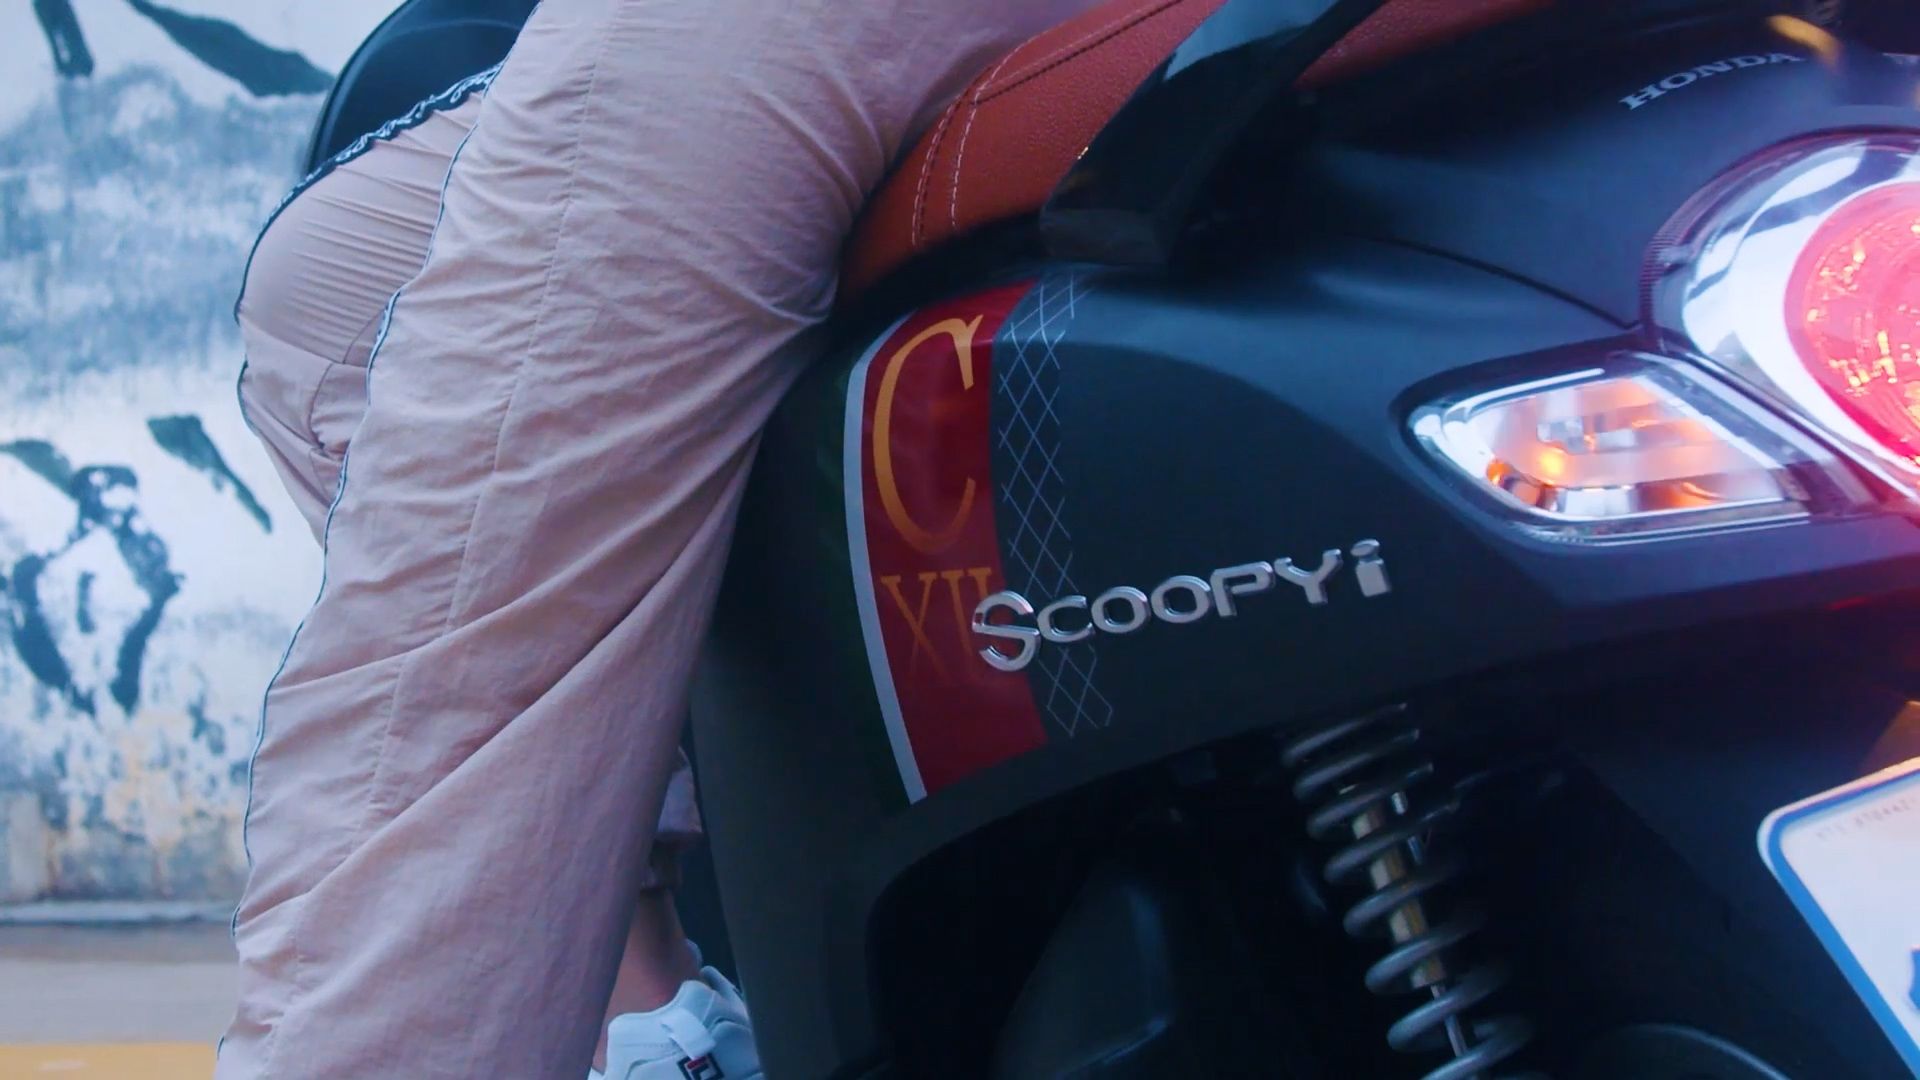 New Scoopy i CLUB12 JeLeng